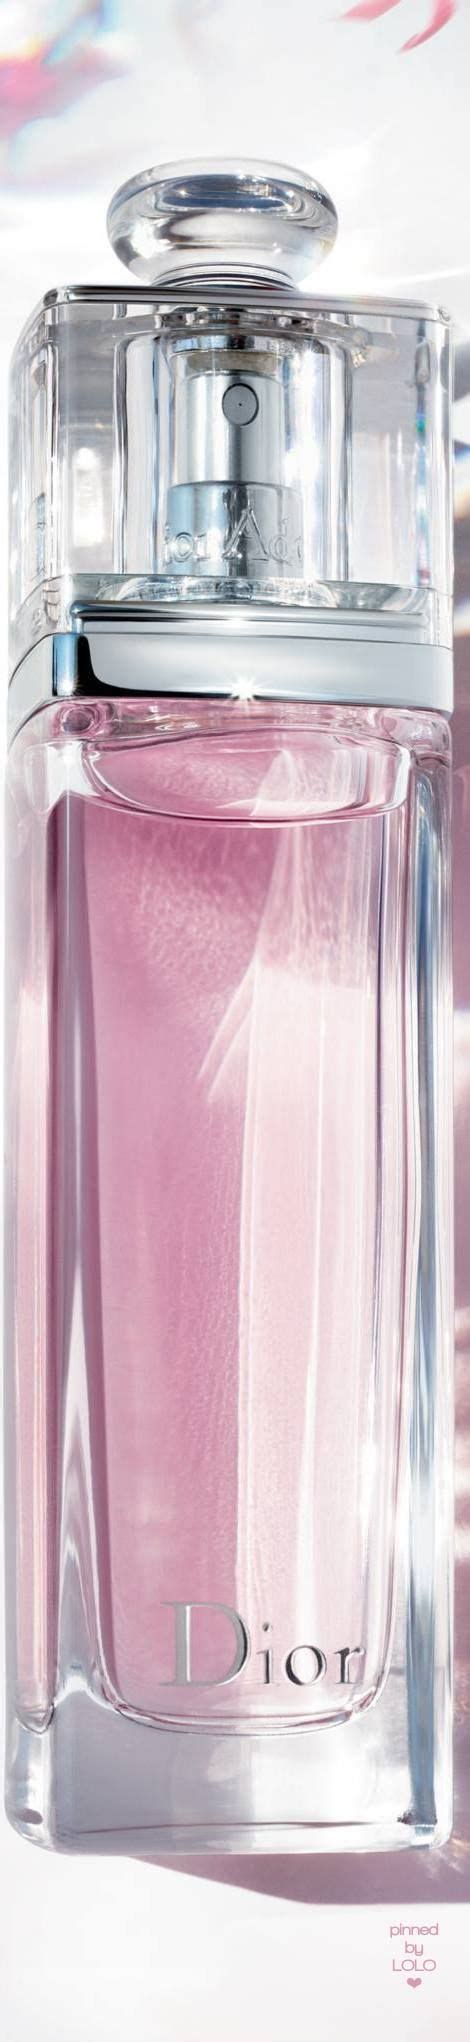 Dior Addict Eau Fraîche The Thrill Of New Scents 30 Day Supply Of Any